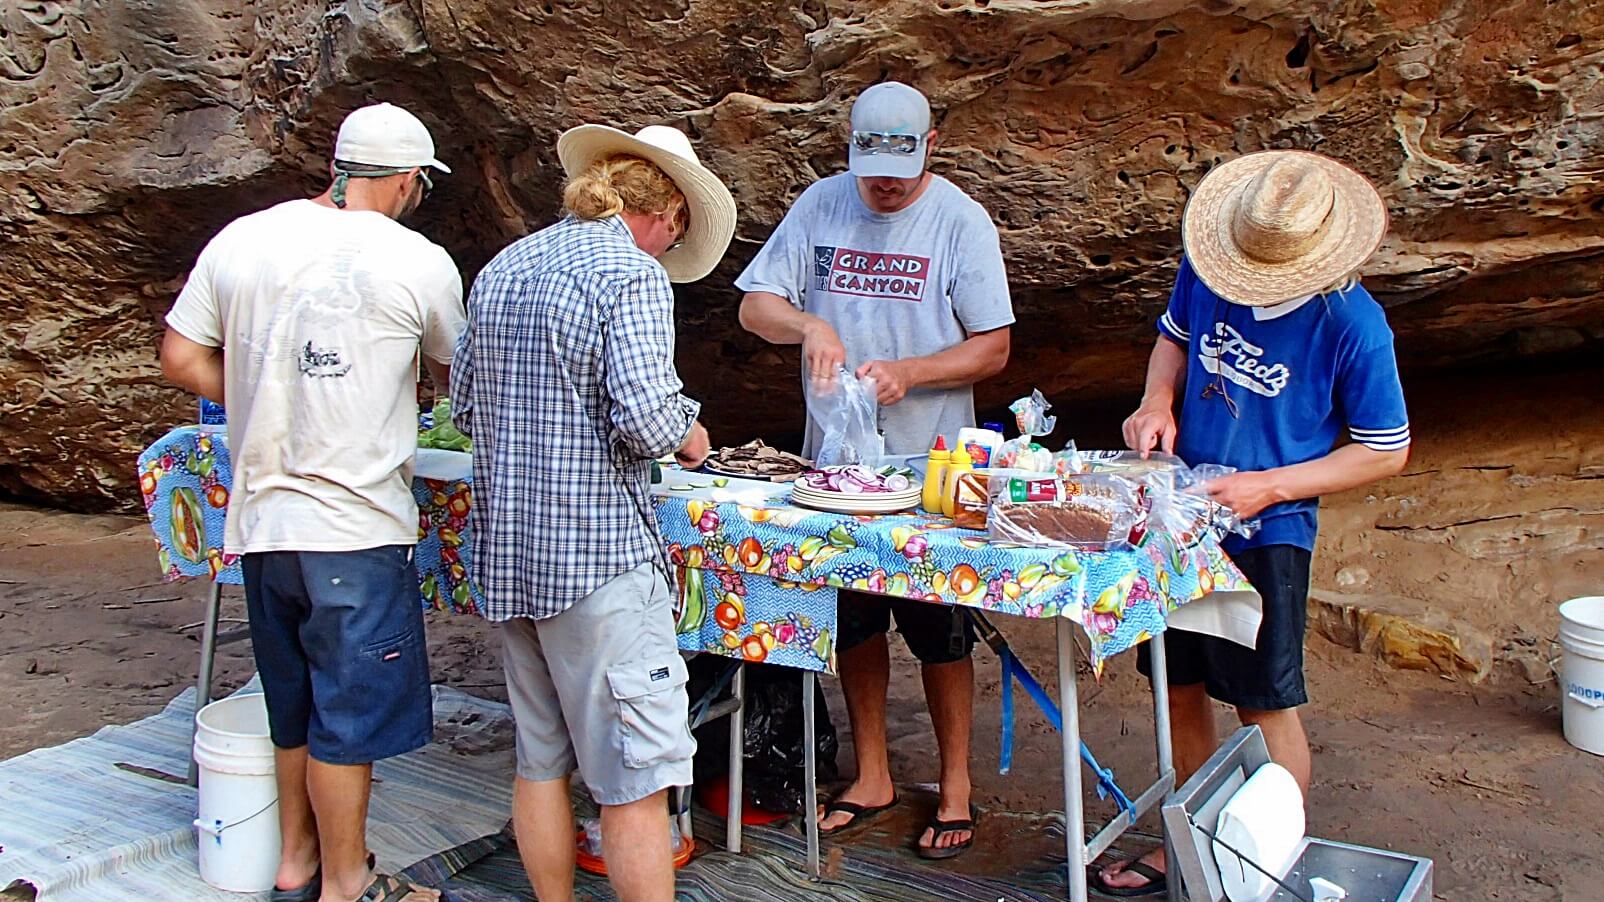 Grand Canyon Whitewater guides prepare lunch for hungry rafters.